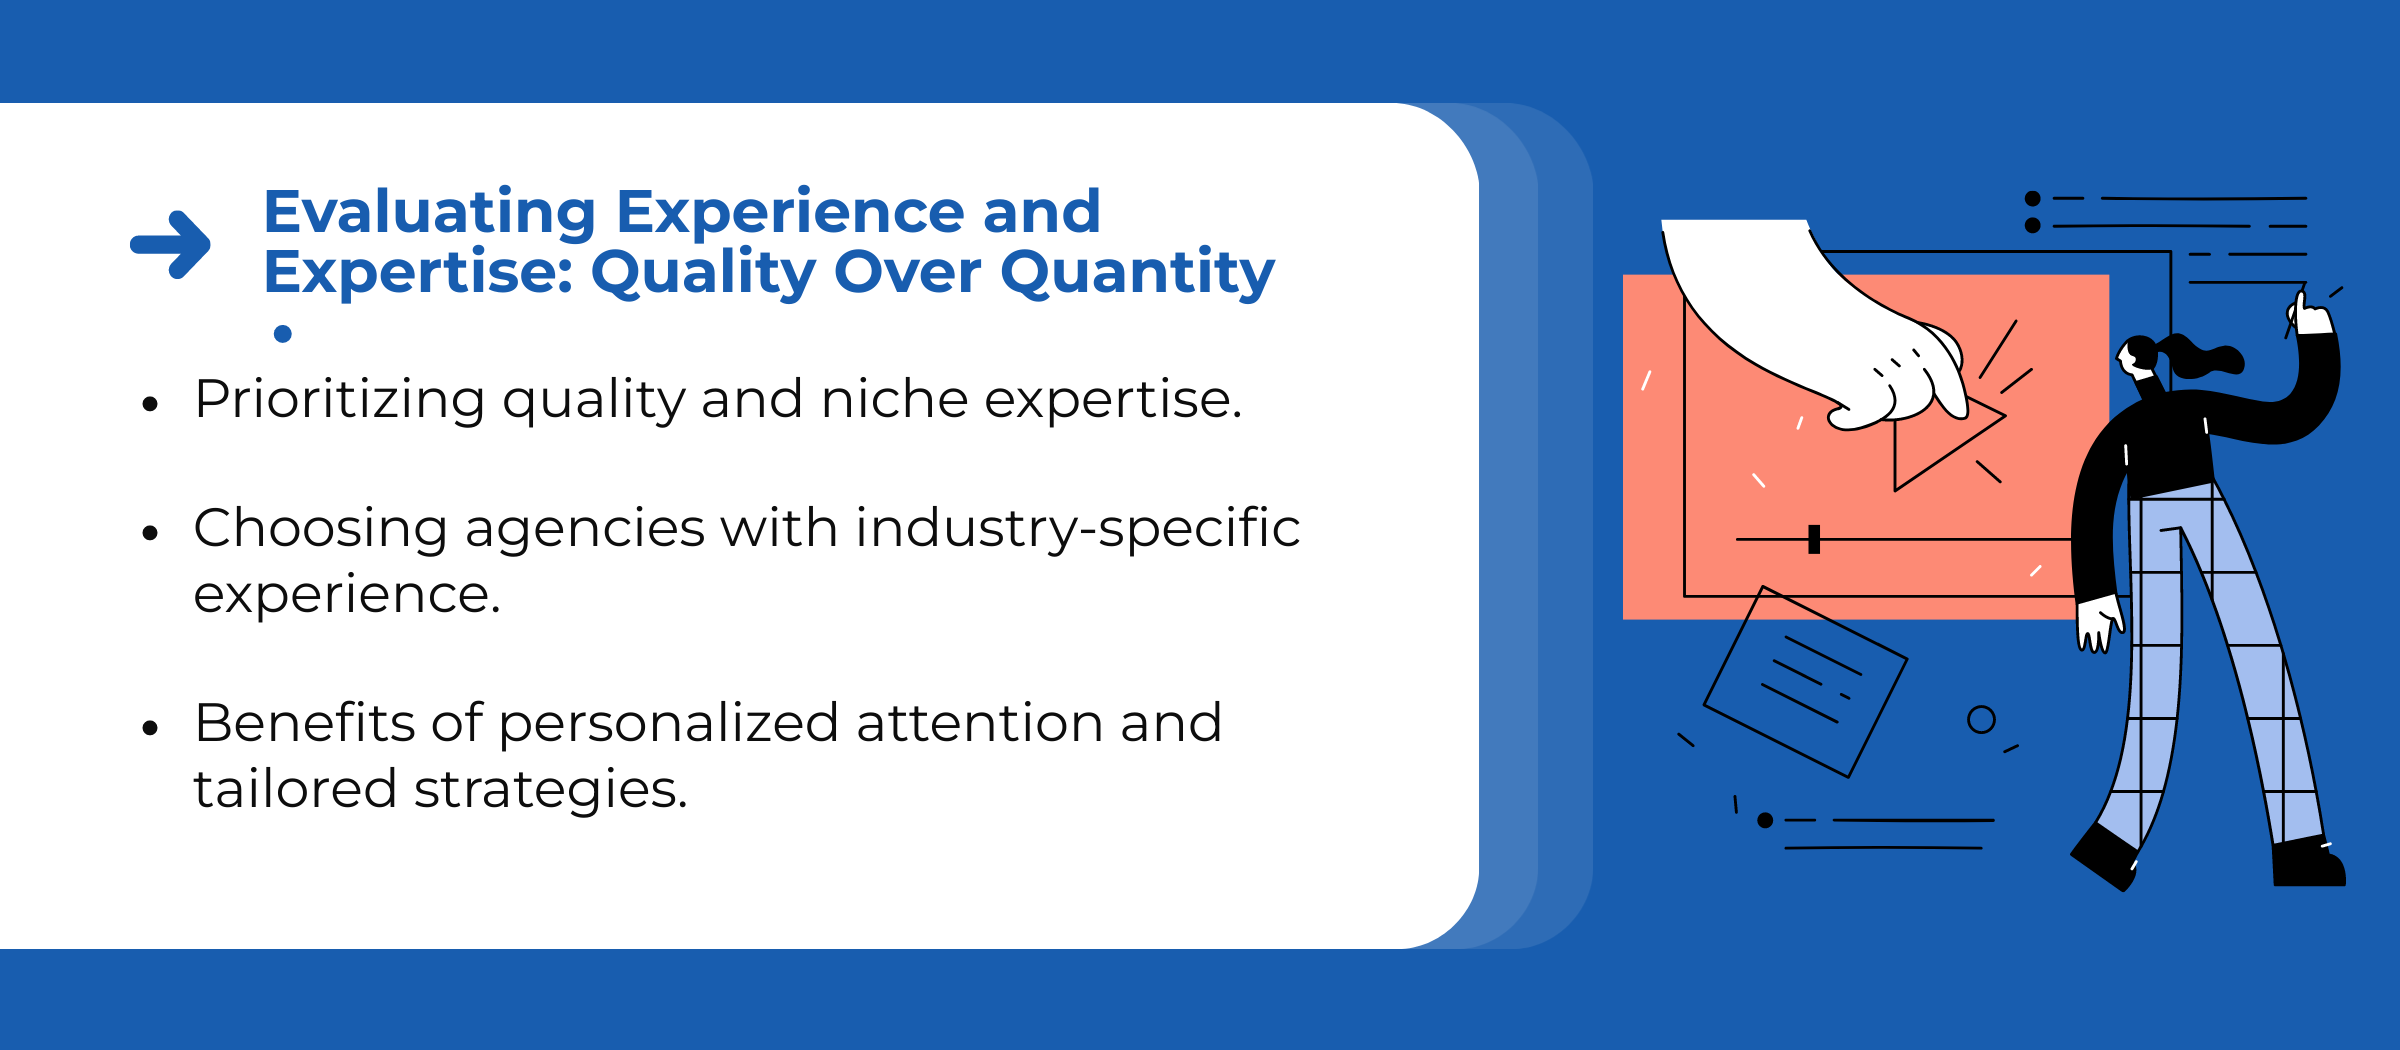 Evaluating Experience and Expertise